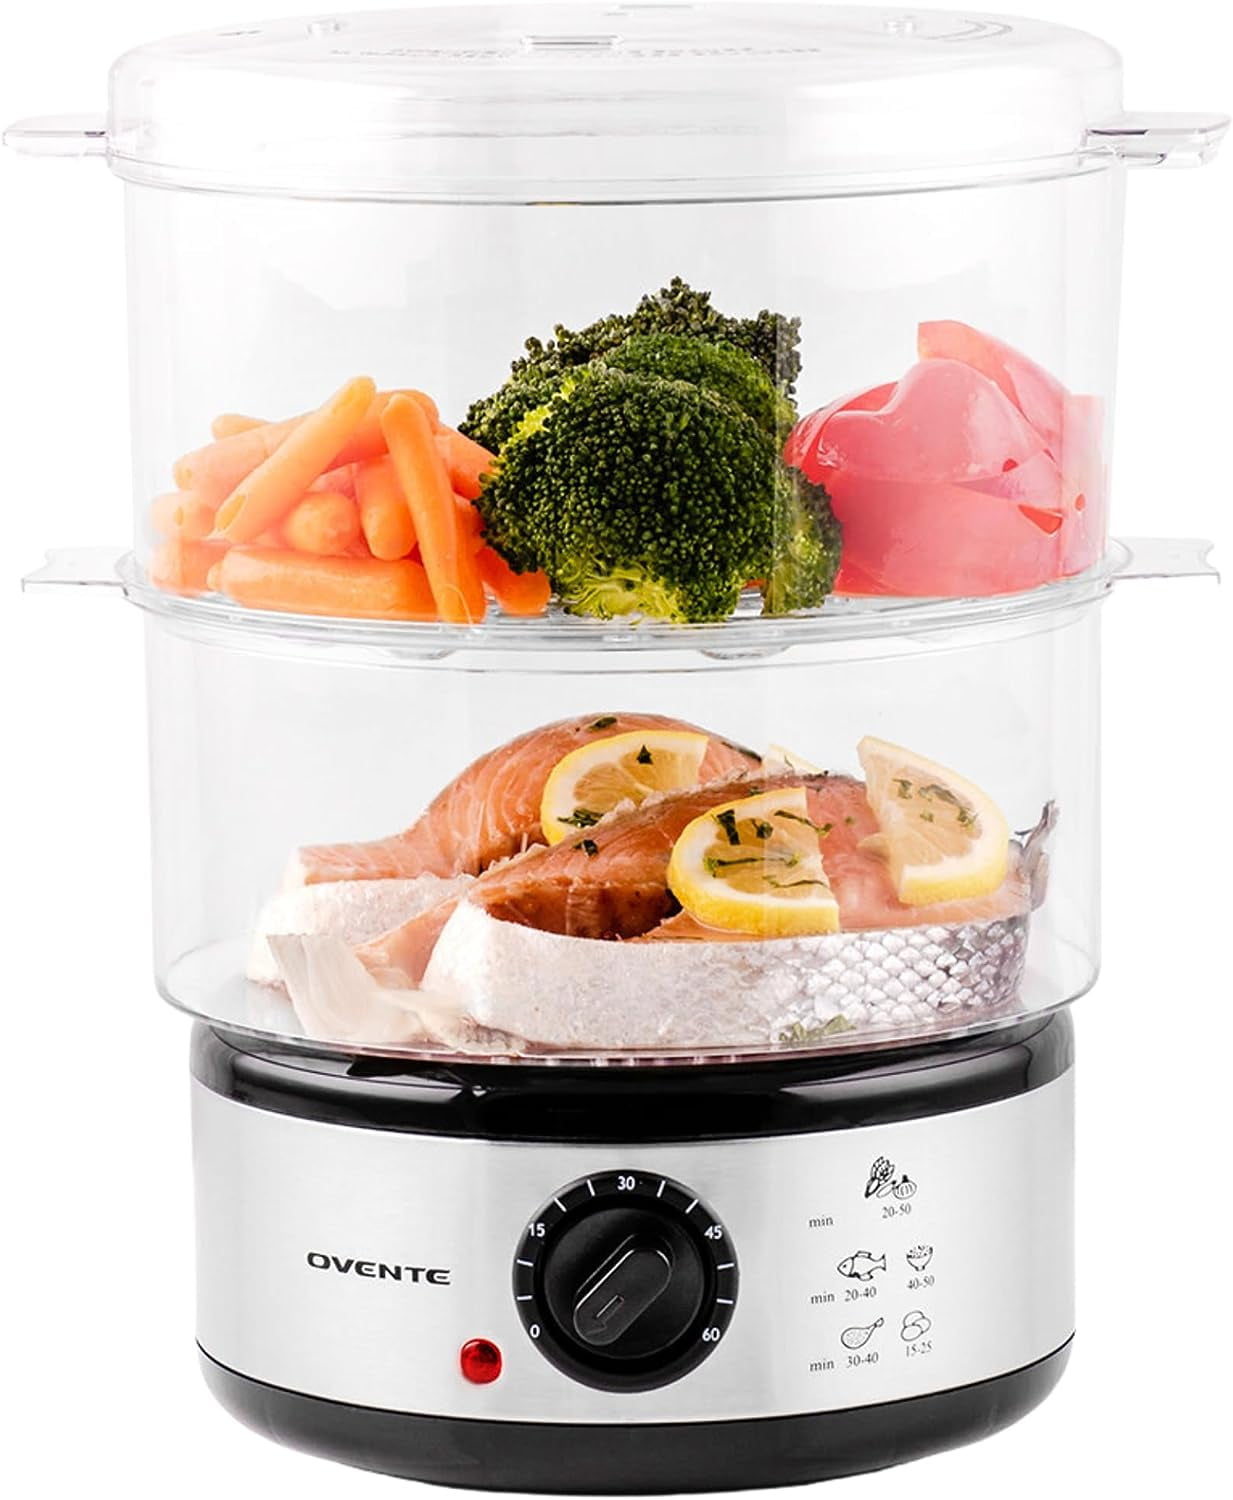 Brentwood Stainless Steel 1.9 Quart Cordless Electric Hot Pot Cooker and Food Steamer in Black